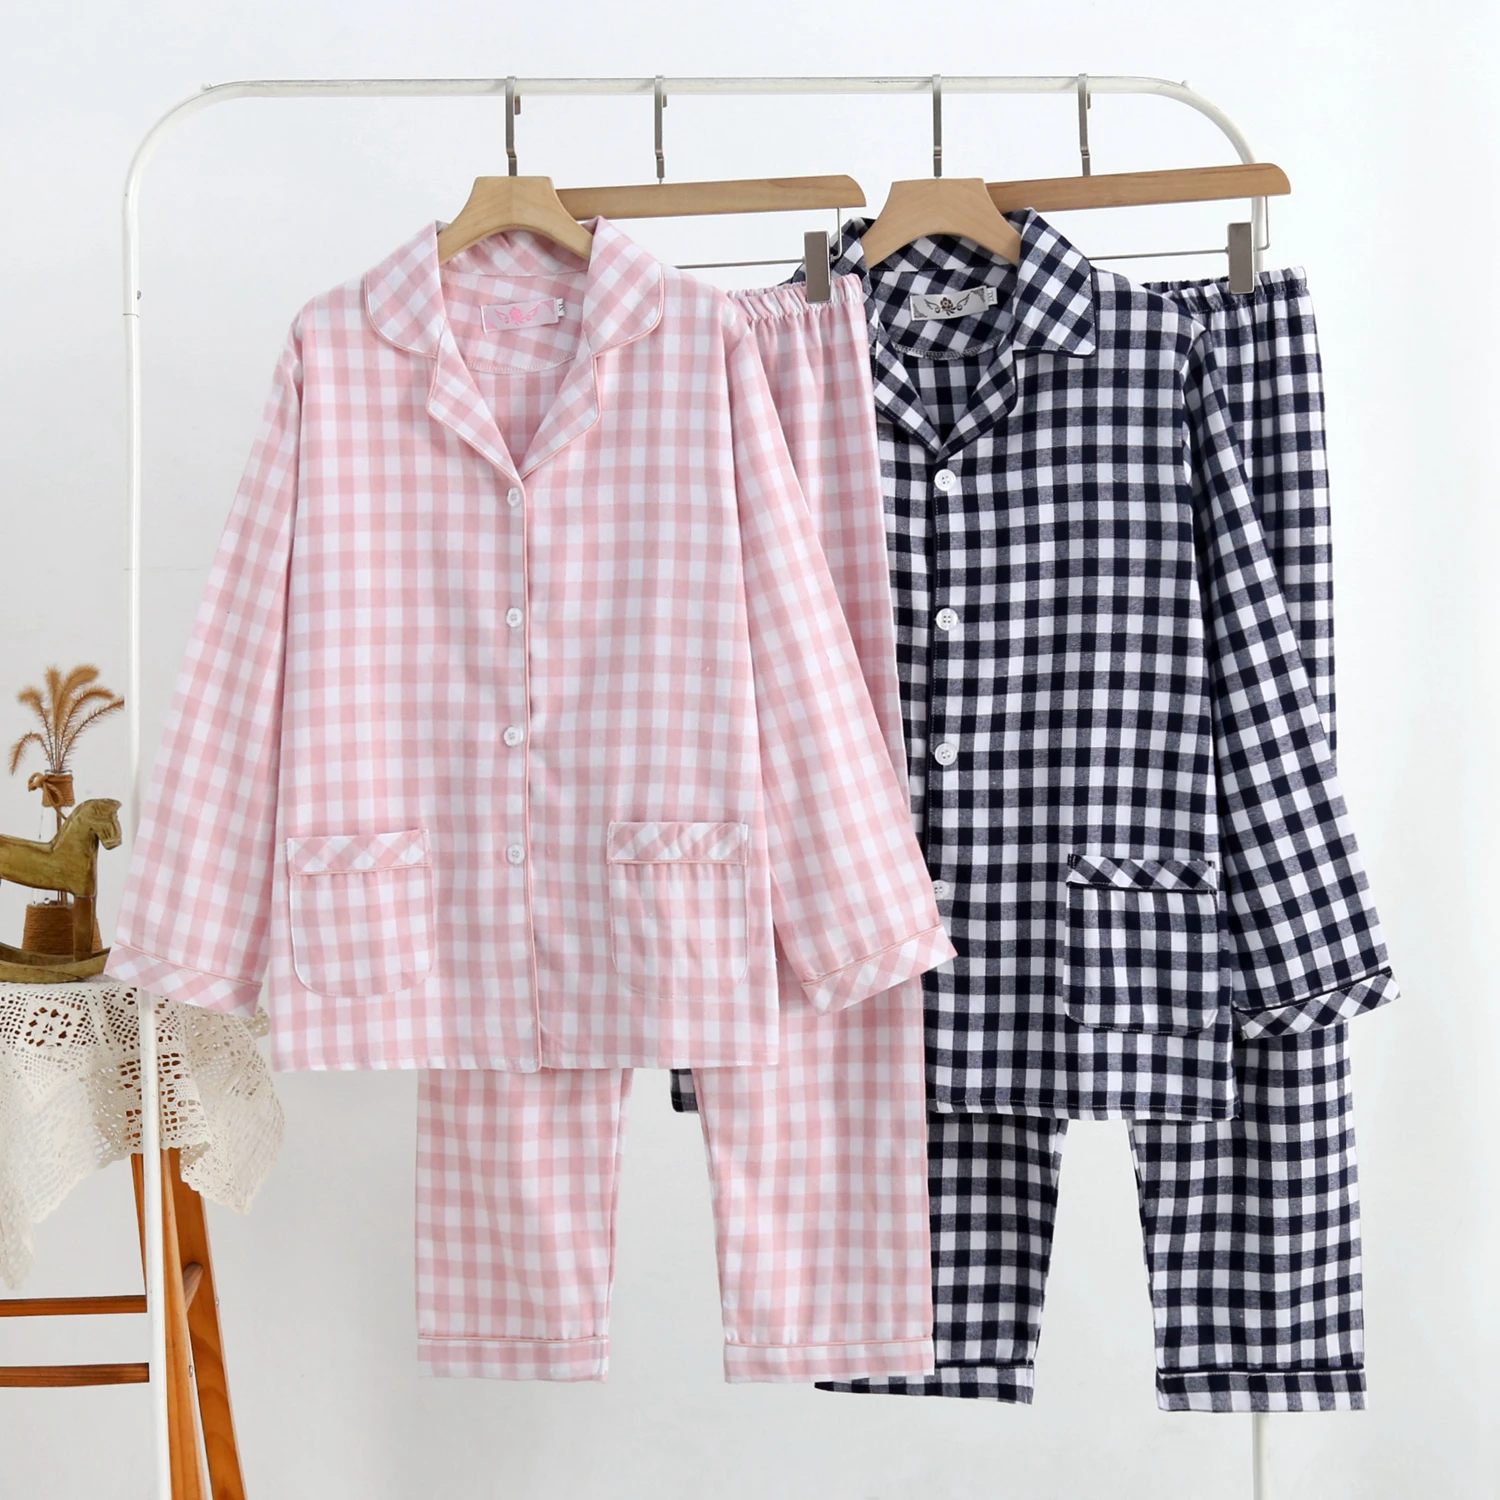 

2022 Newest Long-sleeved Trousers Suits for Autumn And Winter Pijamas For Couples Cotton Homewear Suit Pajamas Plaid Sleepwears